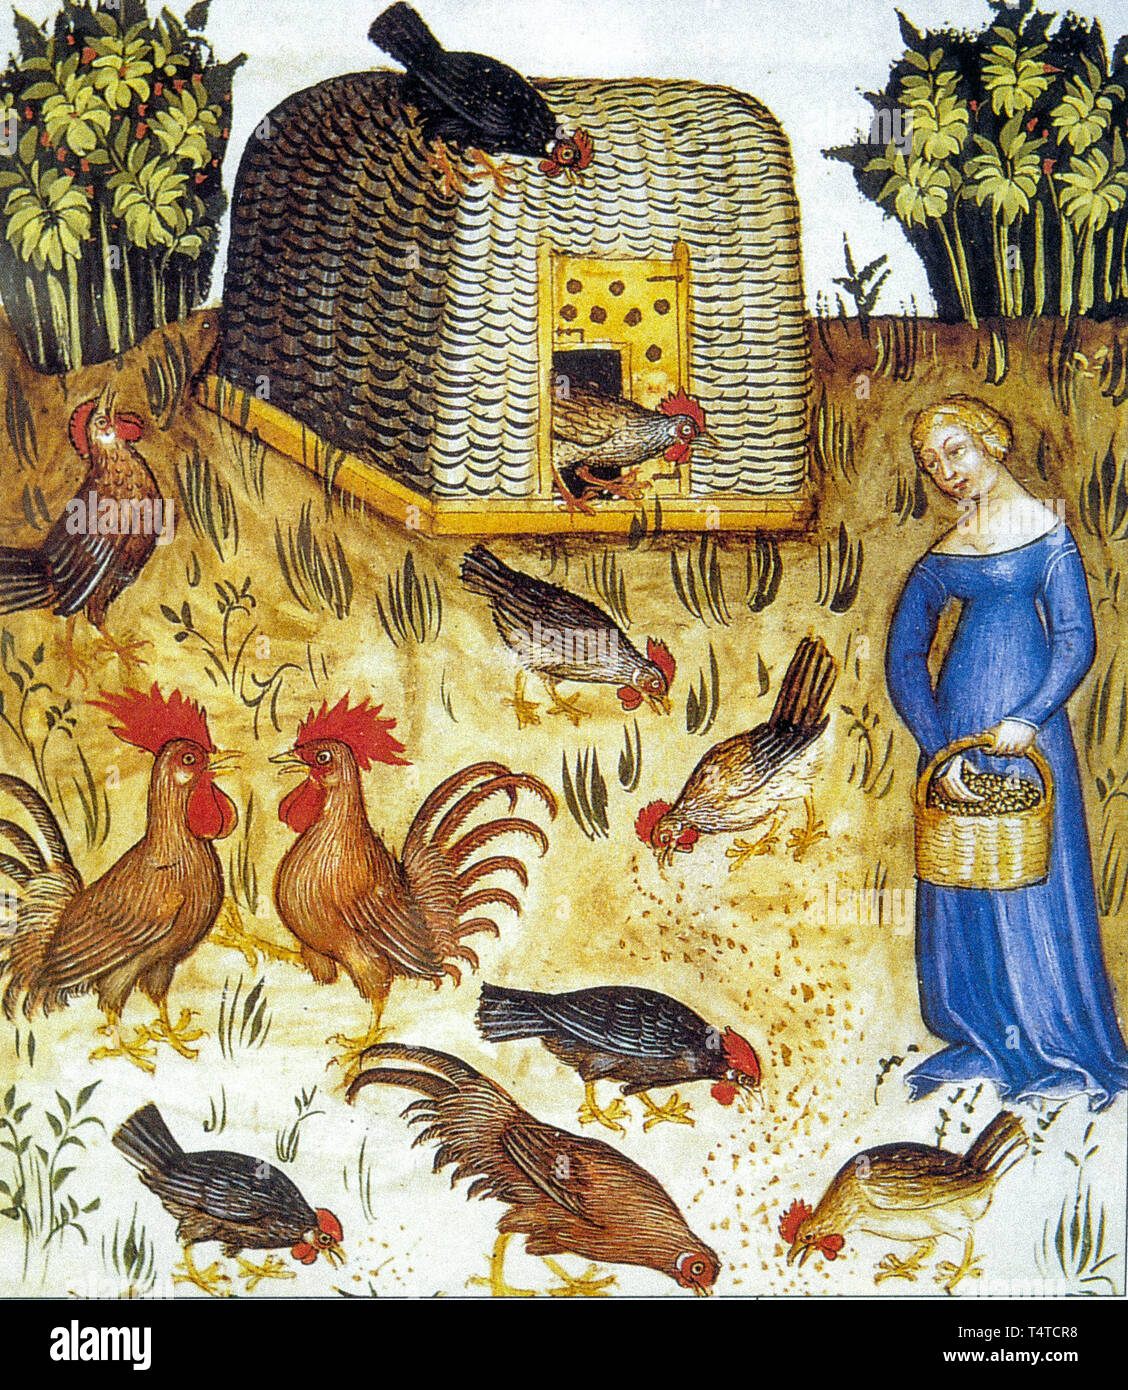 farm animals, chickens, roosters in a medieval miniature Stock Photo